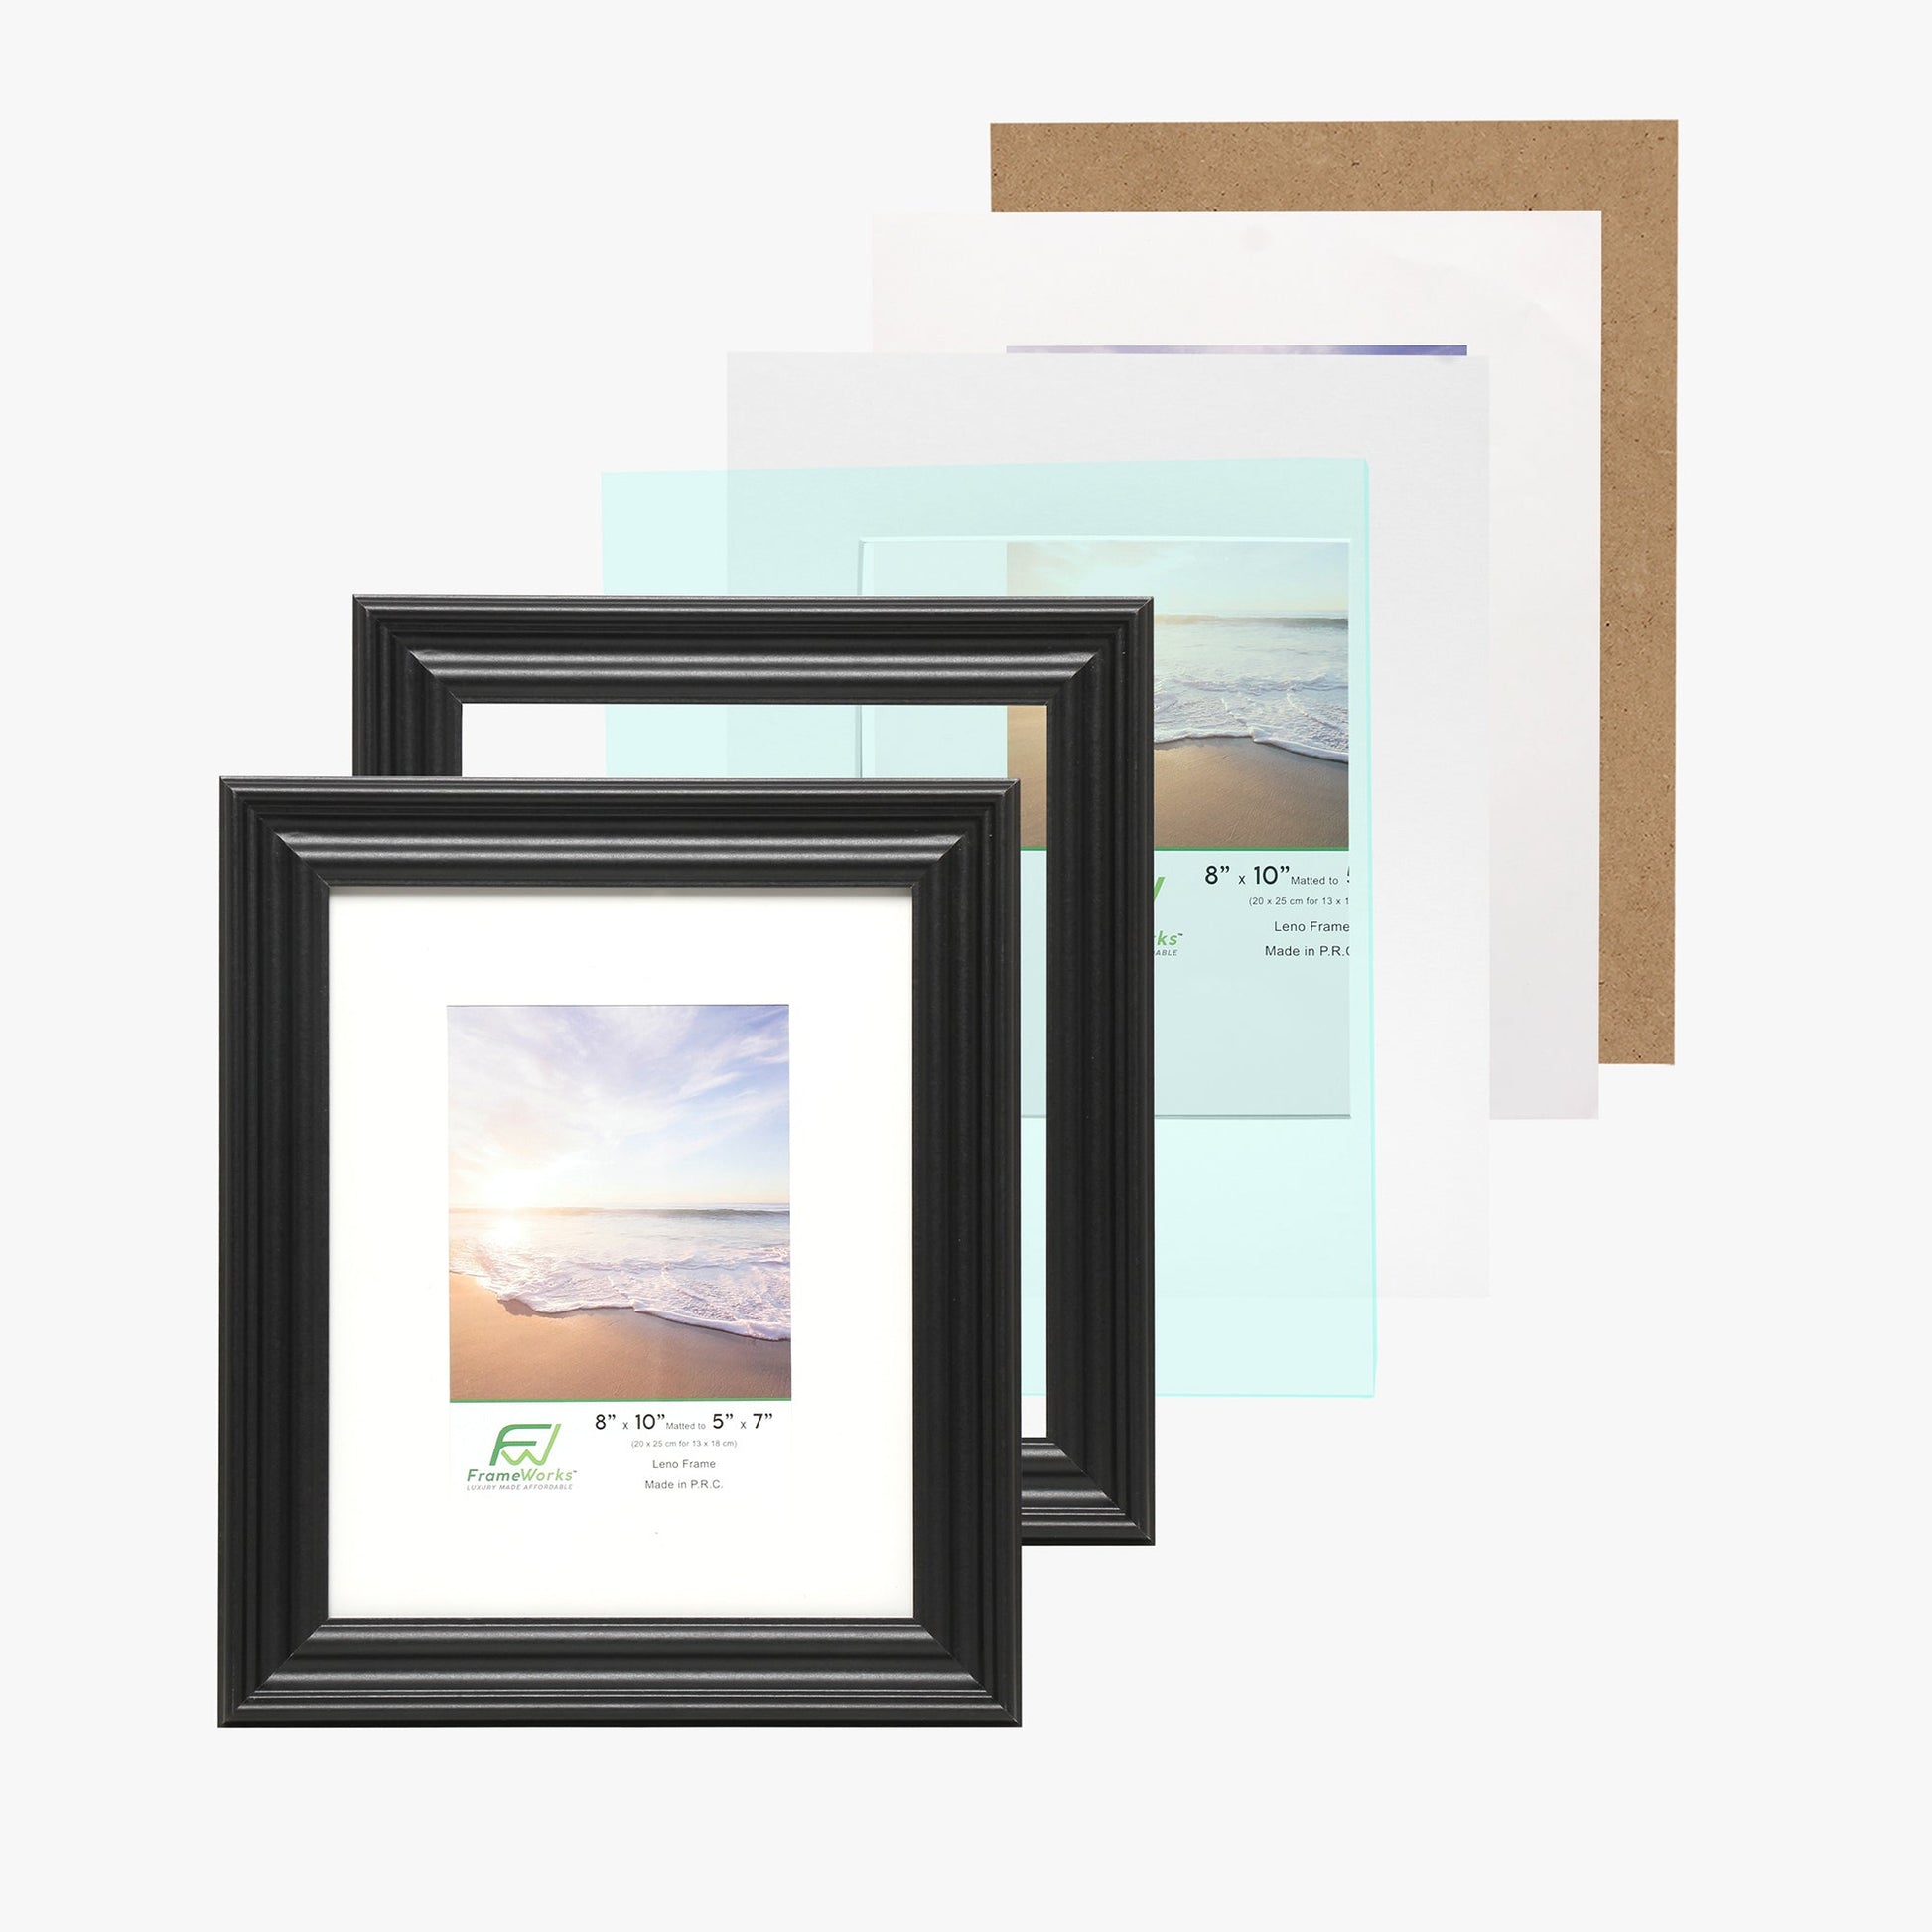 8" x 10" Black Wood 2-Pack Picture Frames with Molded Edges, 5" x 7" Matted